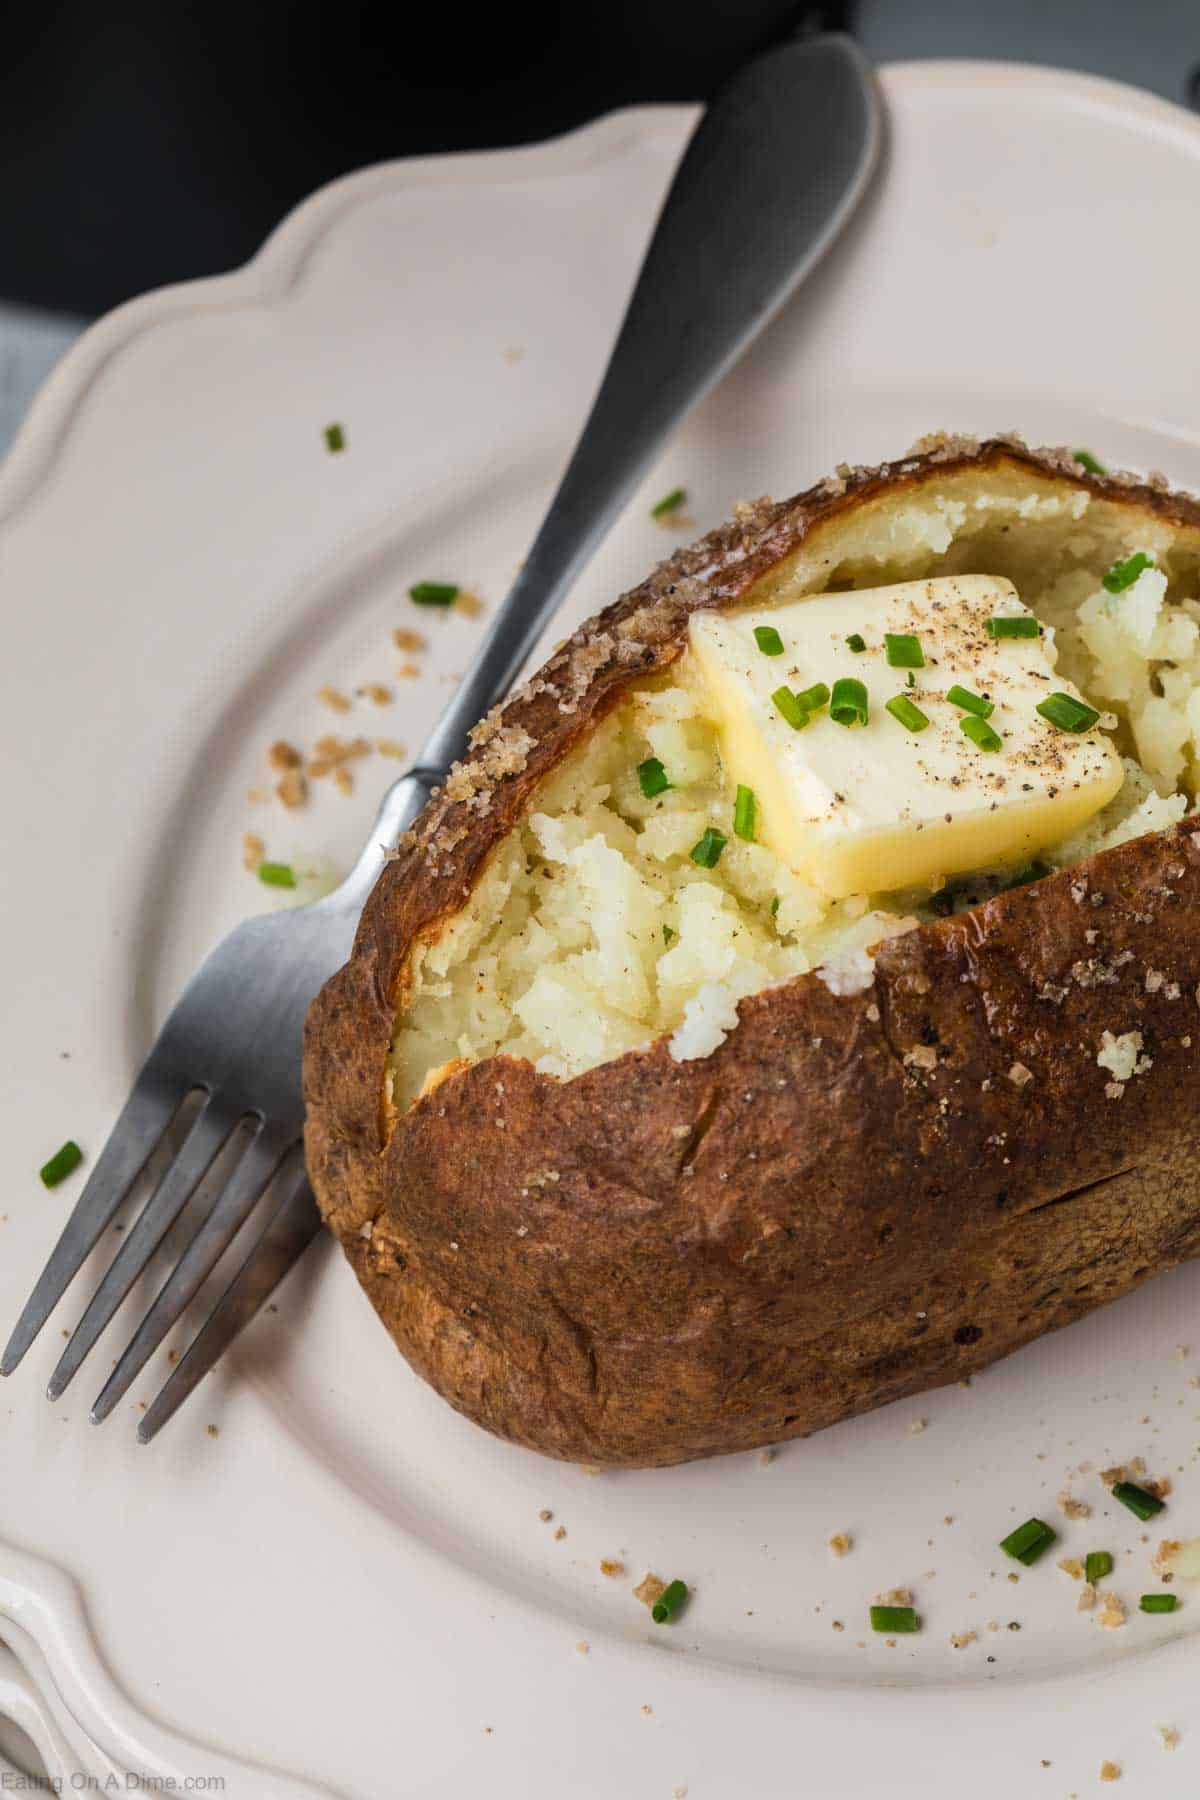 An air fryer baked potato split open, topped with a slice of melting butter, freshly ground black pepper, and chopped chives. It is served on a white plate with a fork resting beside it.